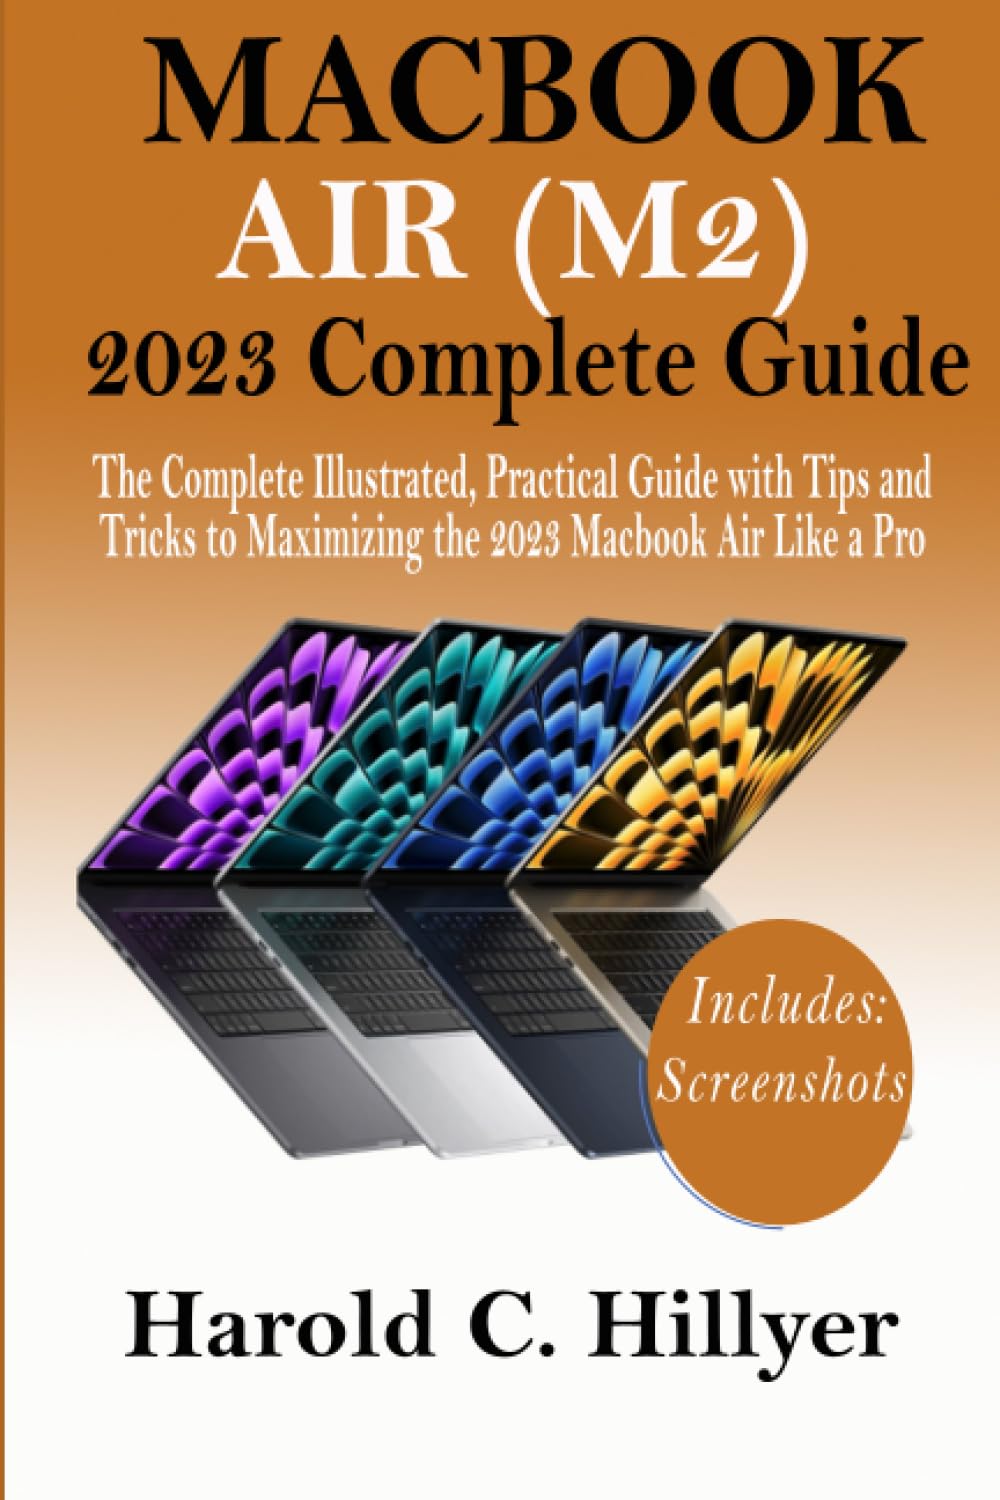 MACBOOK AIR (M2) 2023 COMPLETE GUIDE: The Complete Illustrated, Practical Guide with Tips and Tricks to Maximizing the 2023 Macbook Air Like a Pro